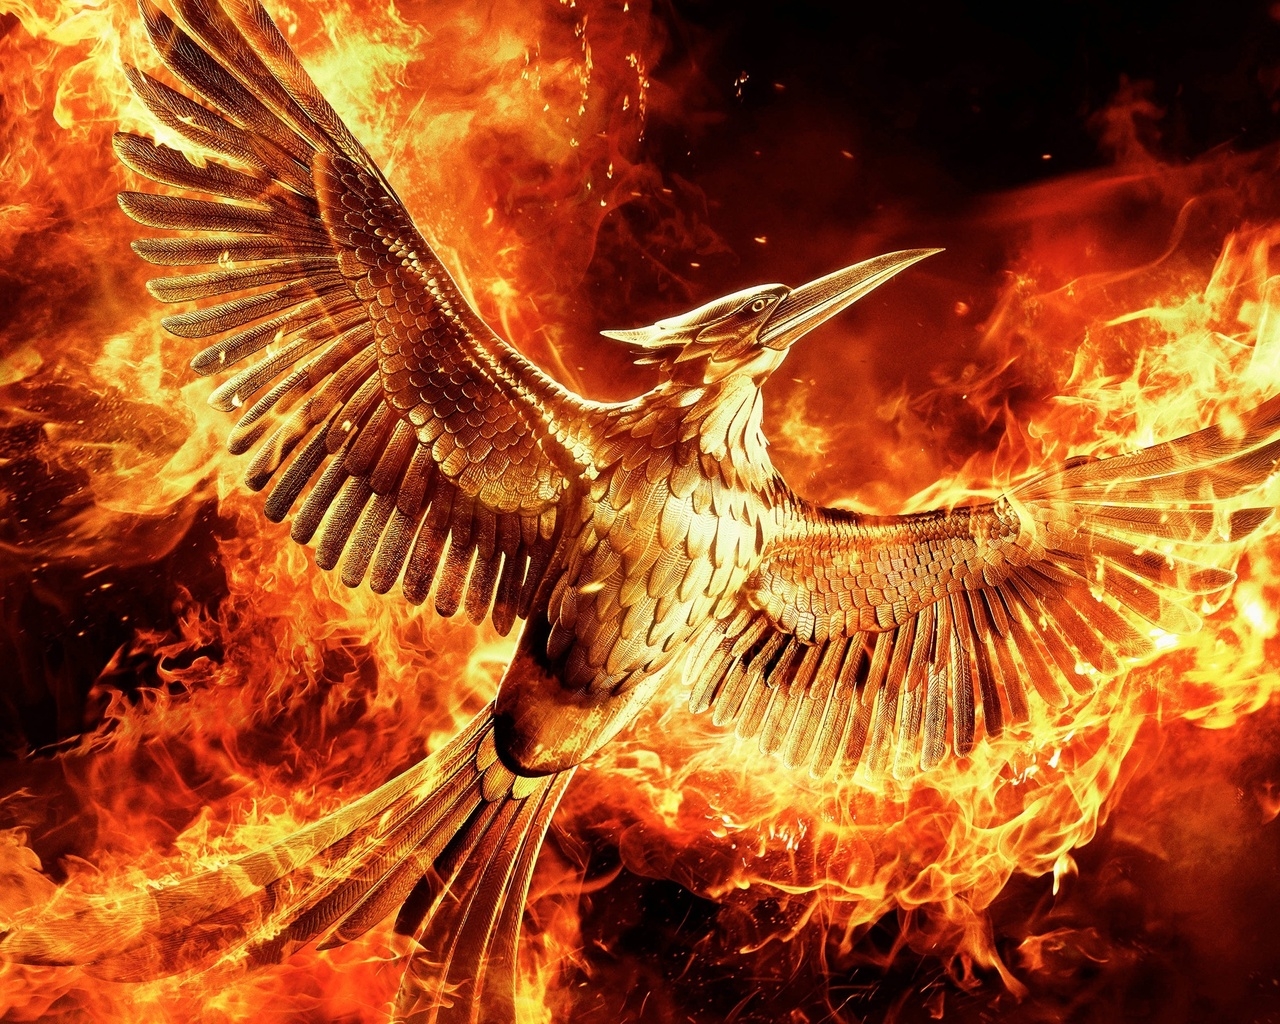 The Hunger Games Mockingjay Part 2 for 1280 x 1024 resolution